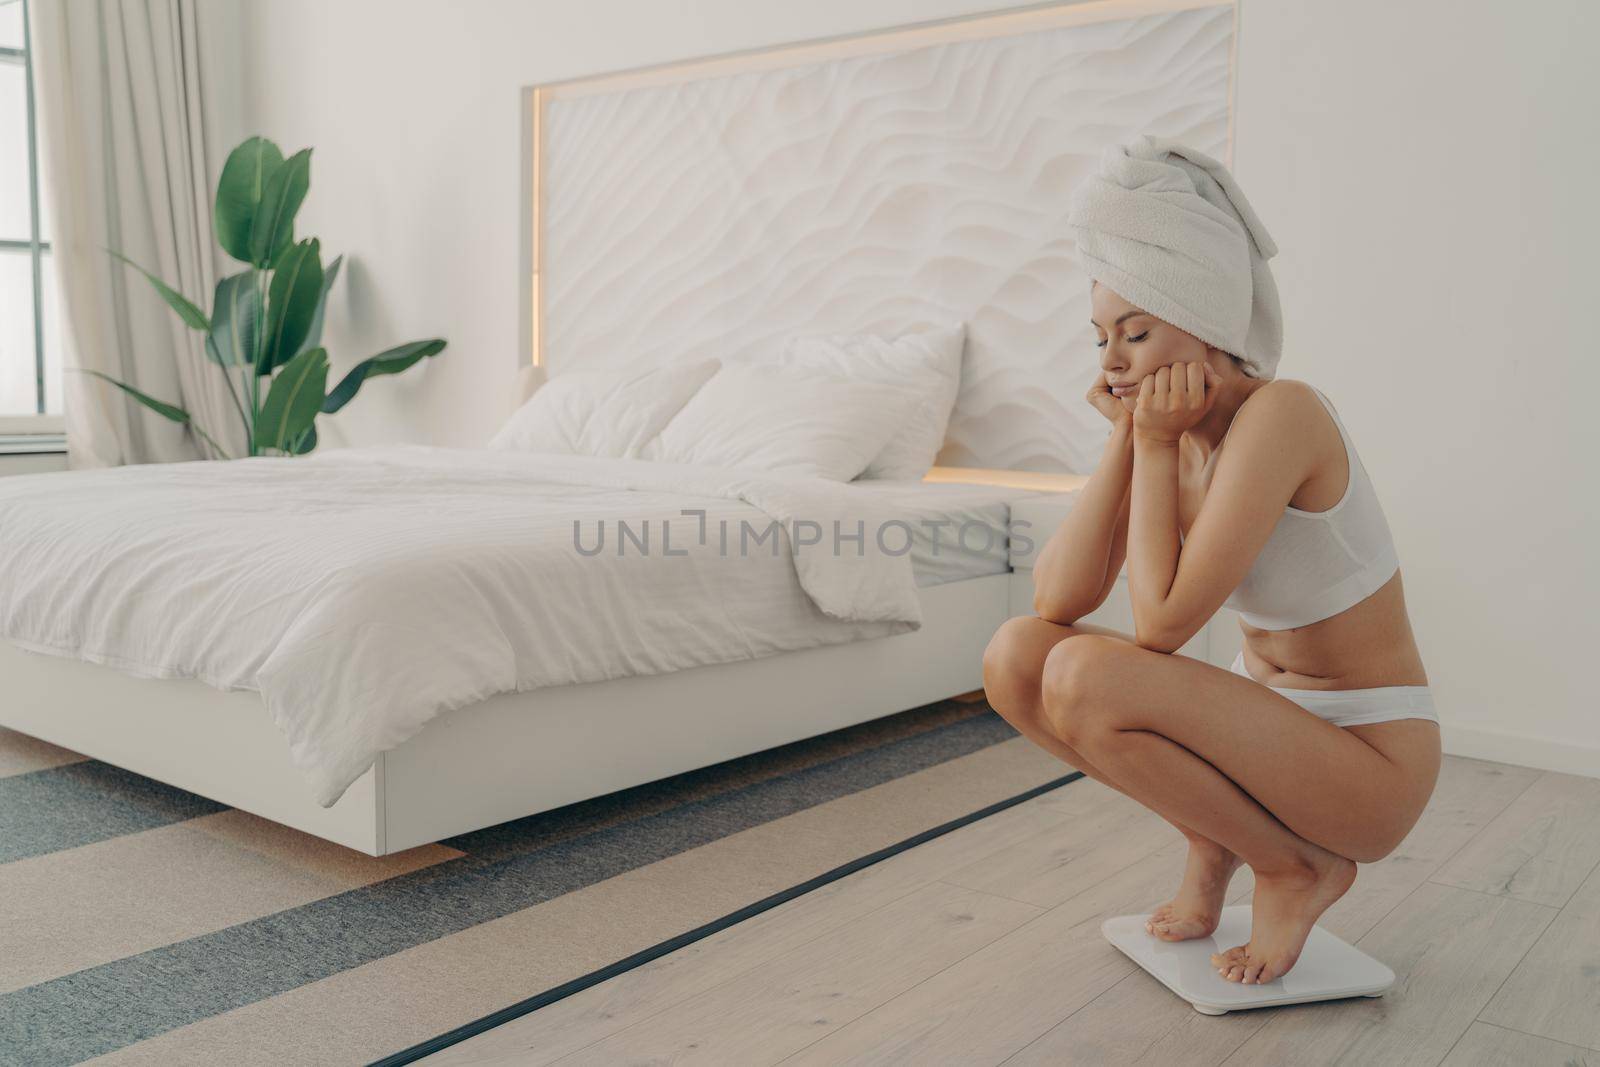 Frustrated young caucasian girl standing barefoot squatted on electronic scale in underwear after taking shower in modern bedroom next to large bed, feeling sad. Weight loss and dieting concept